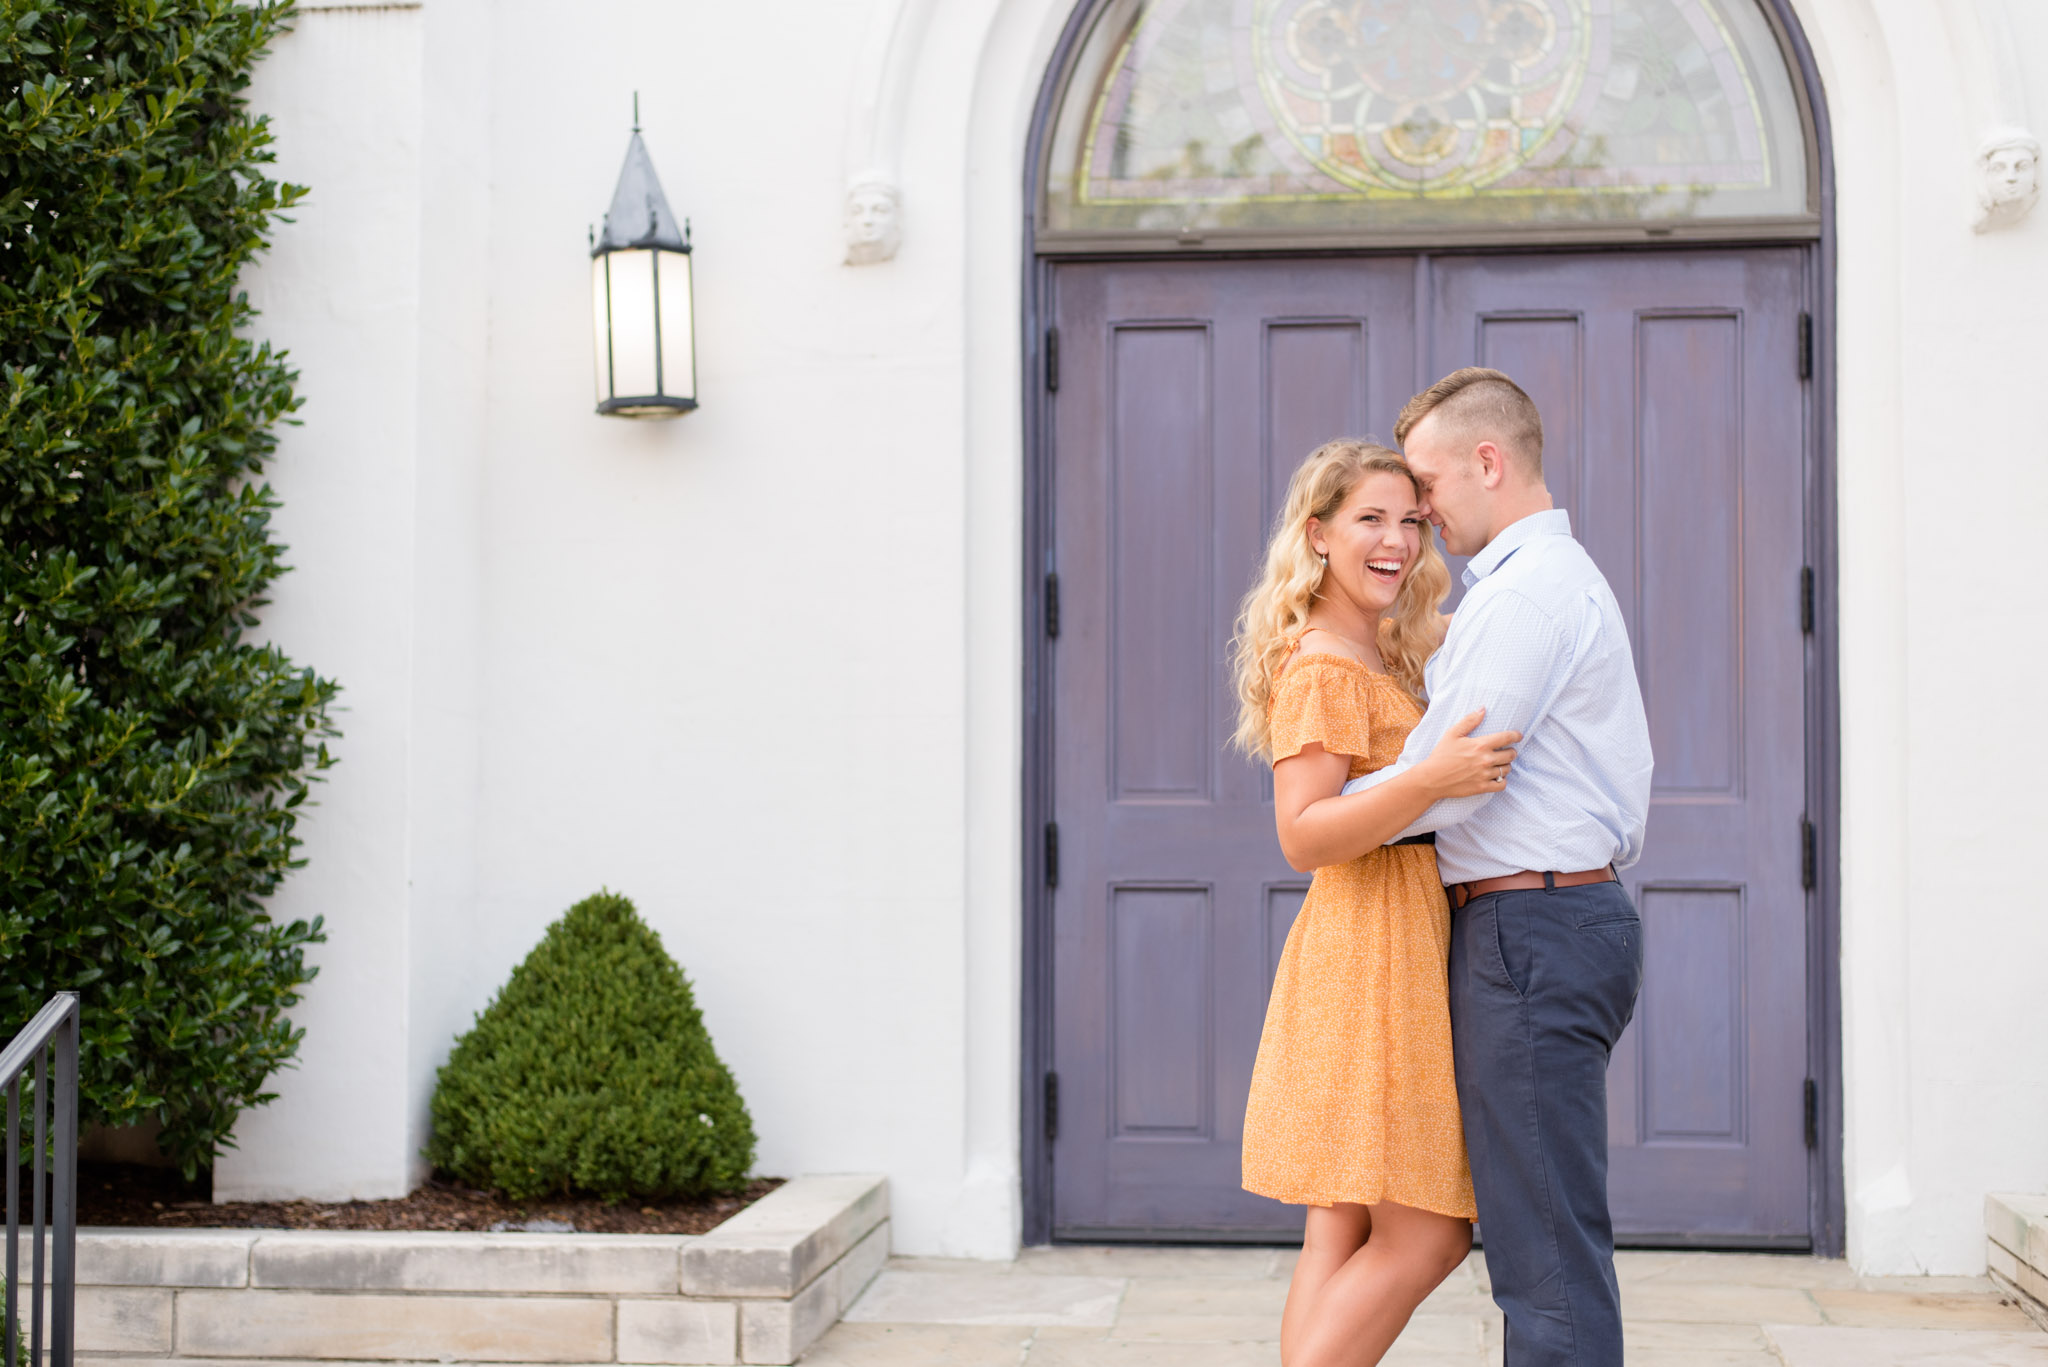 Engaged couple laughs in front of purple door.